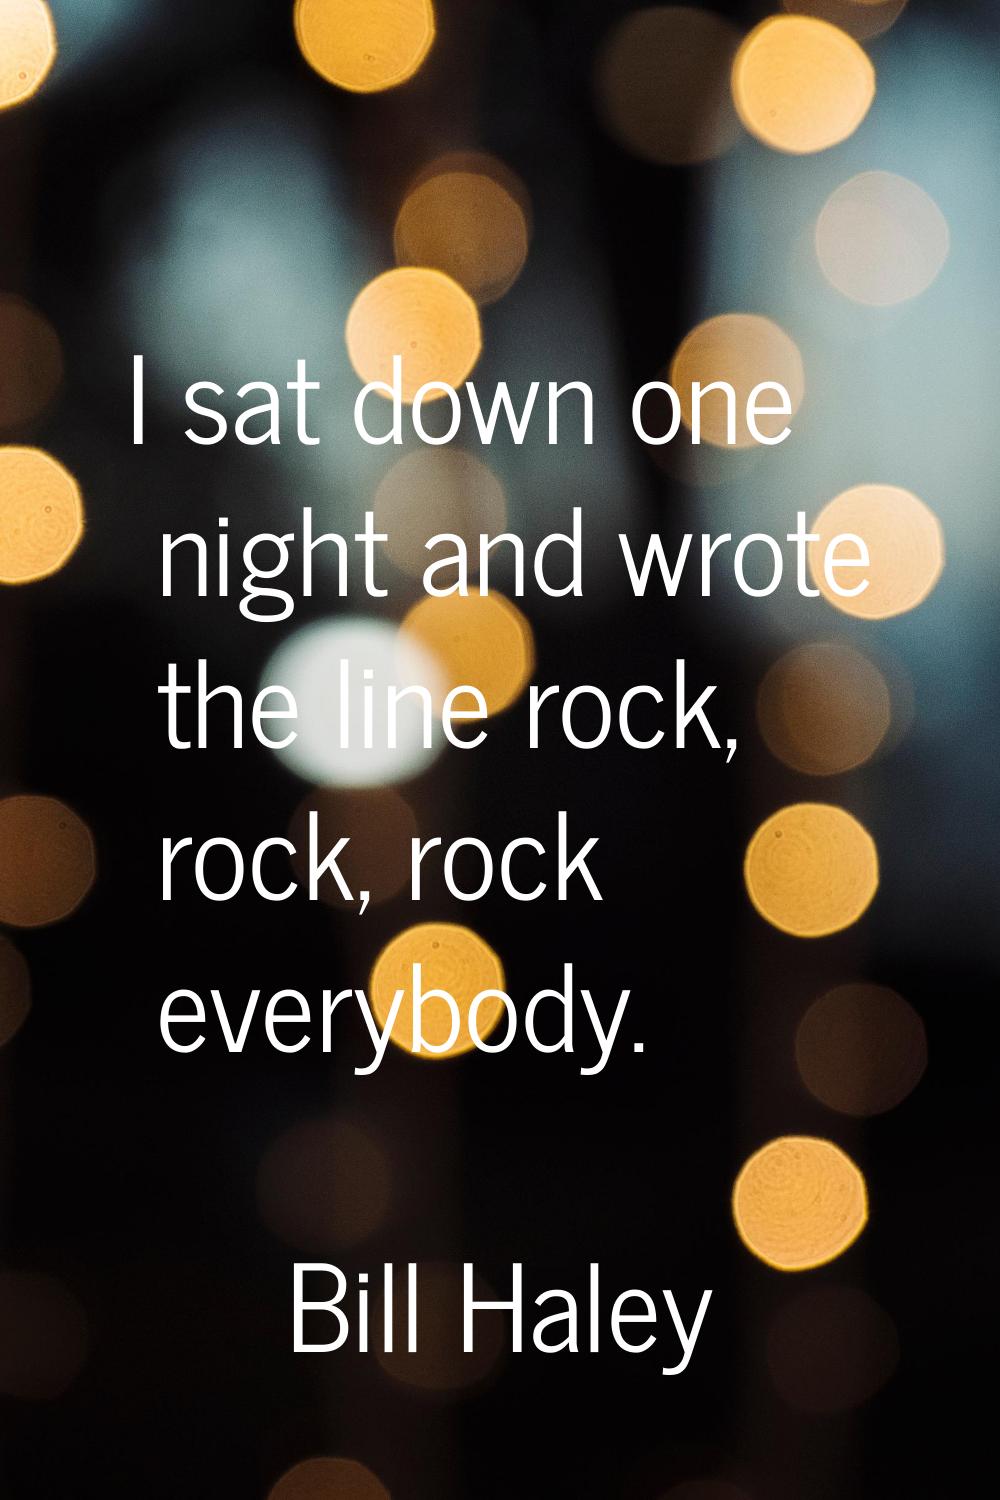 I sat down one night and wrote the line rock, rock, rock everybody.